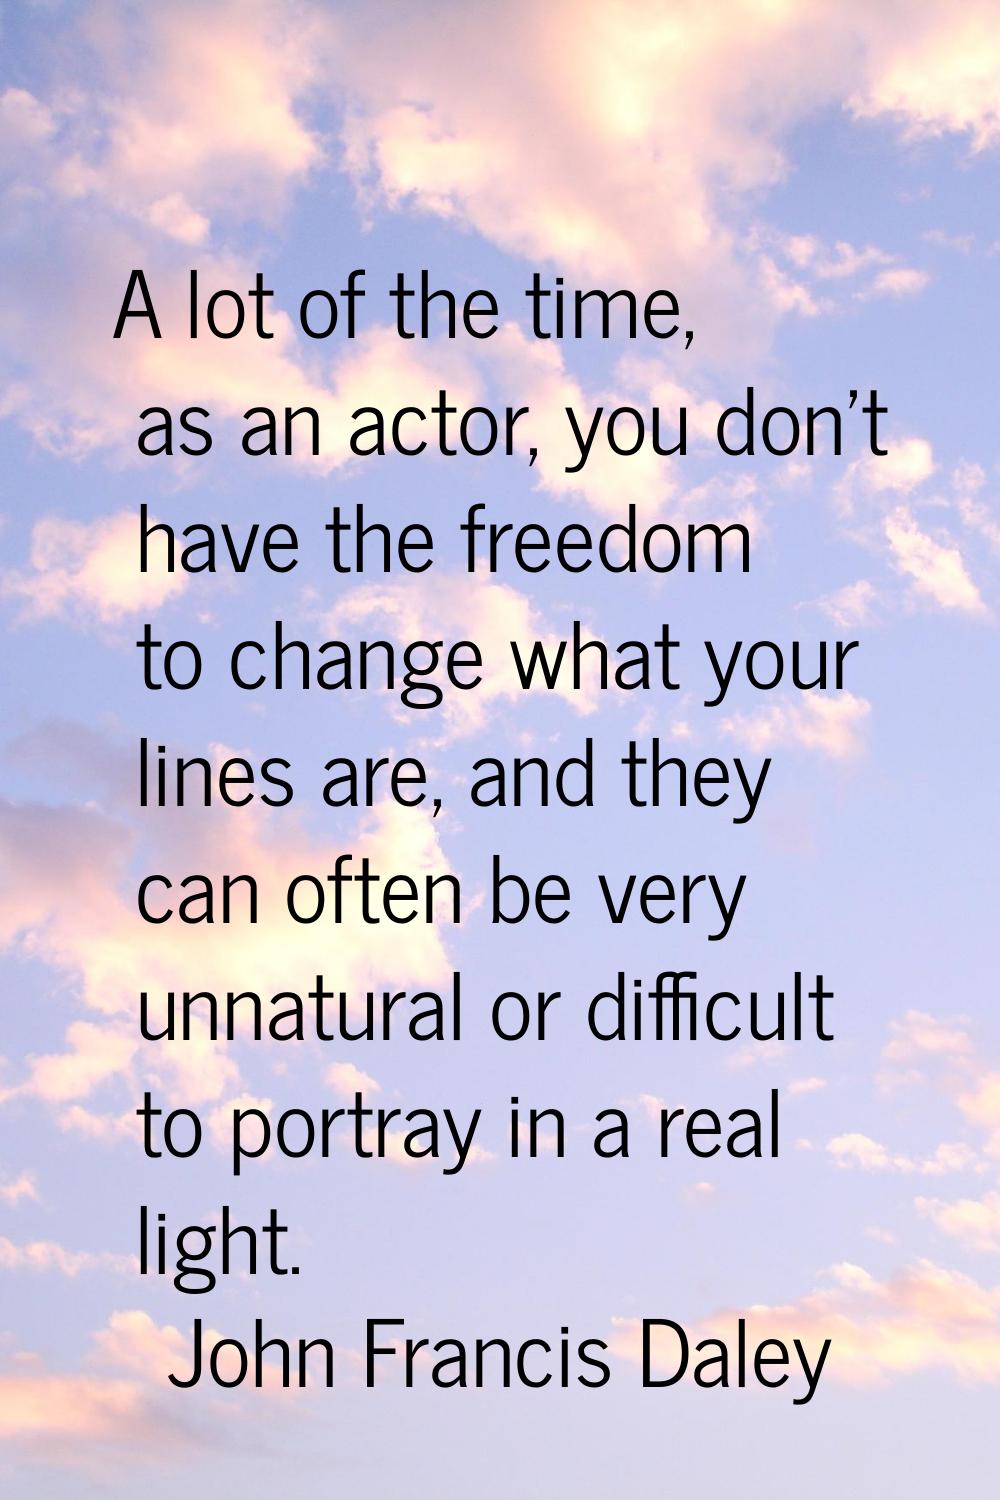 A lot of the time, as an actor, you don't have the freedom to change what your lines are, and they 